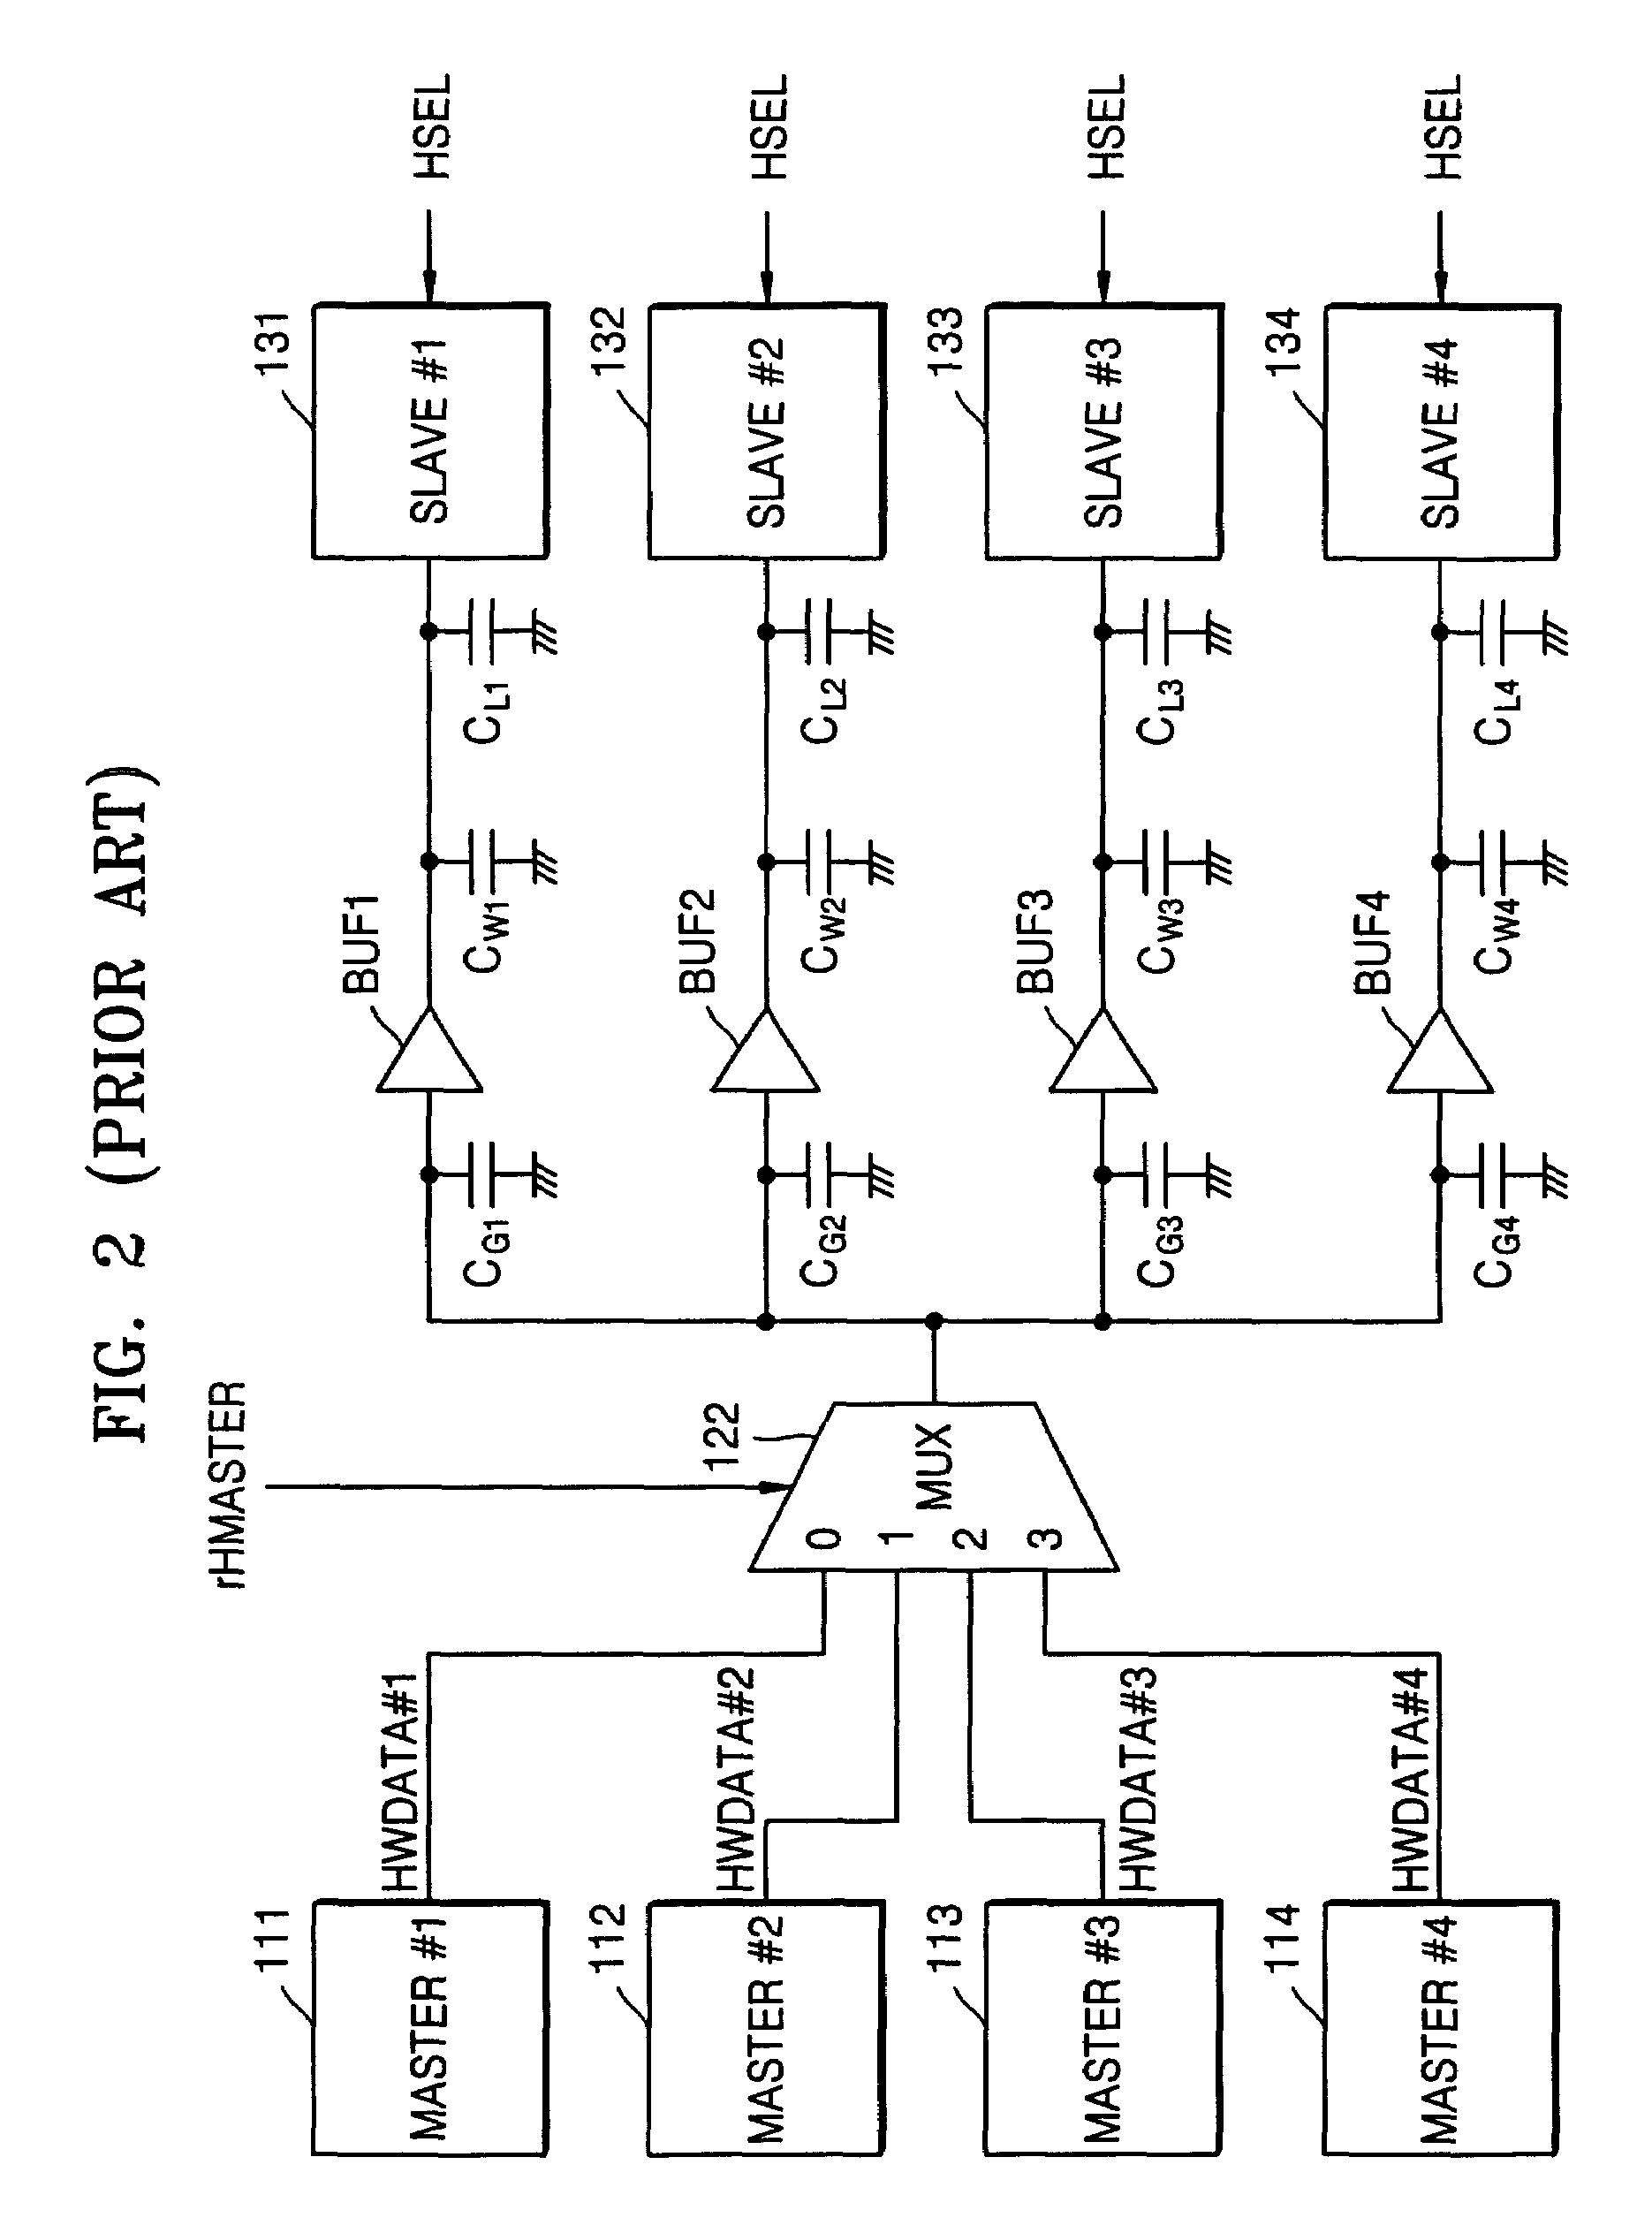 Advanced microcontroller bus architecture (AMBA) system with reduced power consumption and method of driving AMBA system